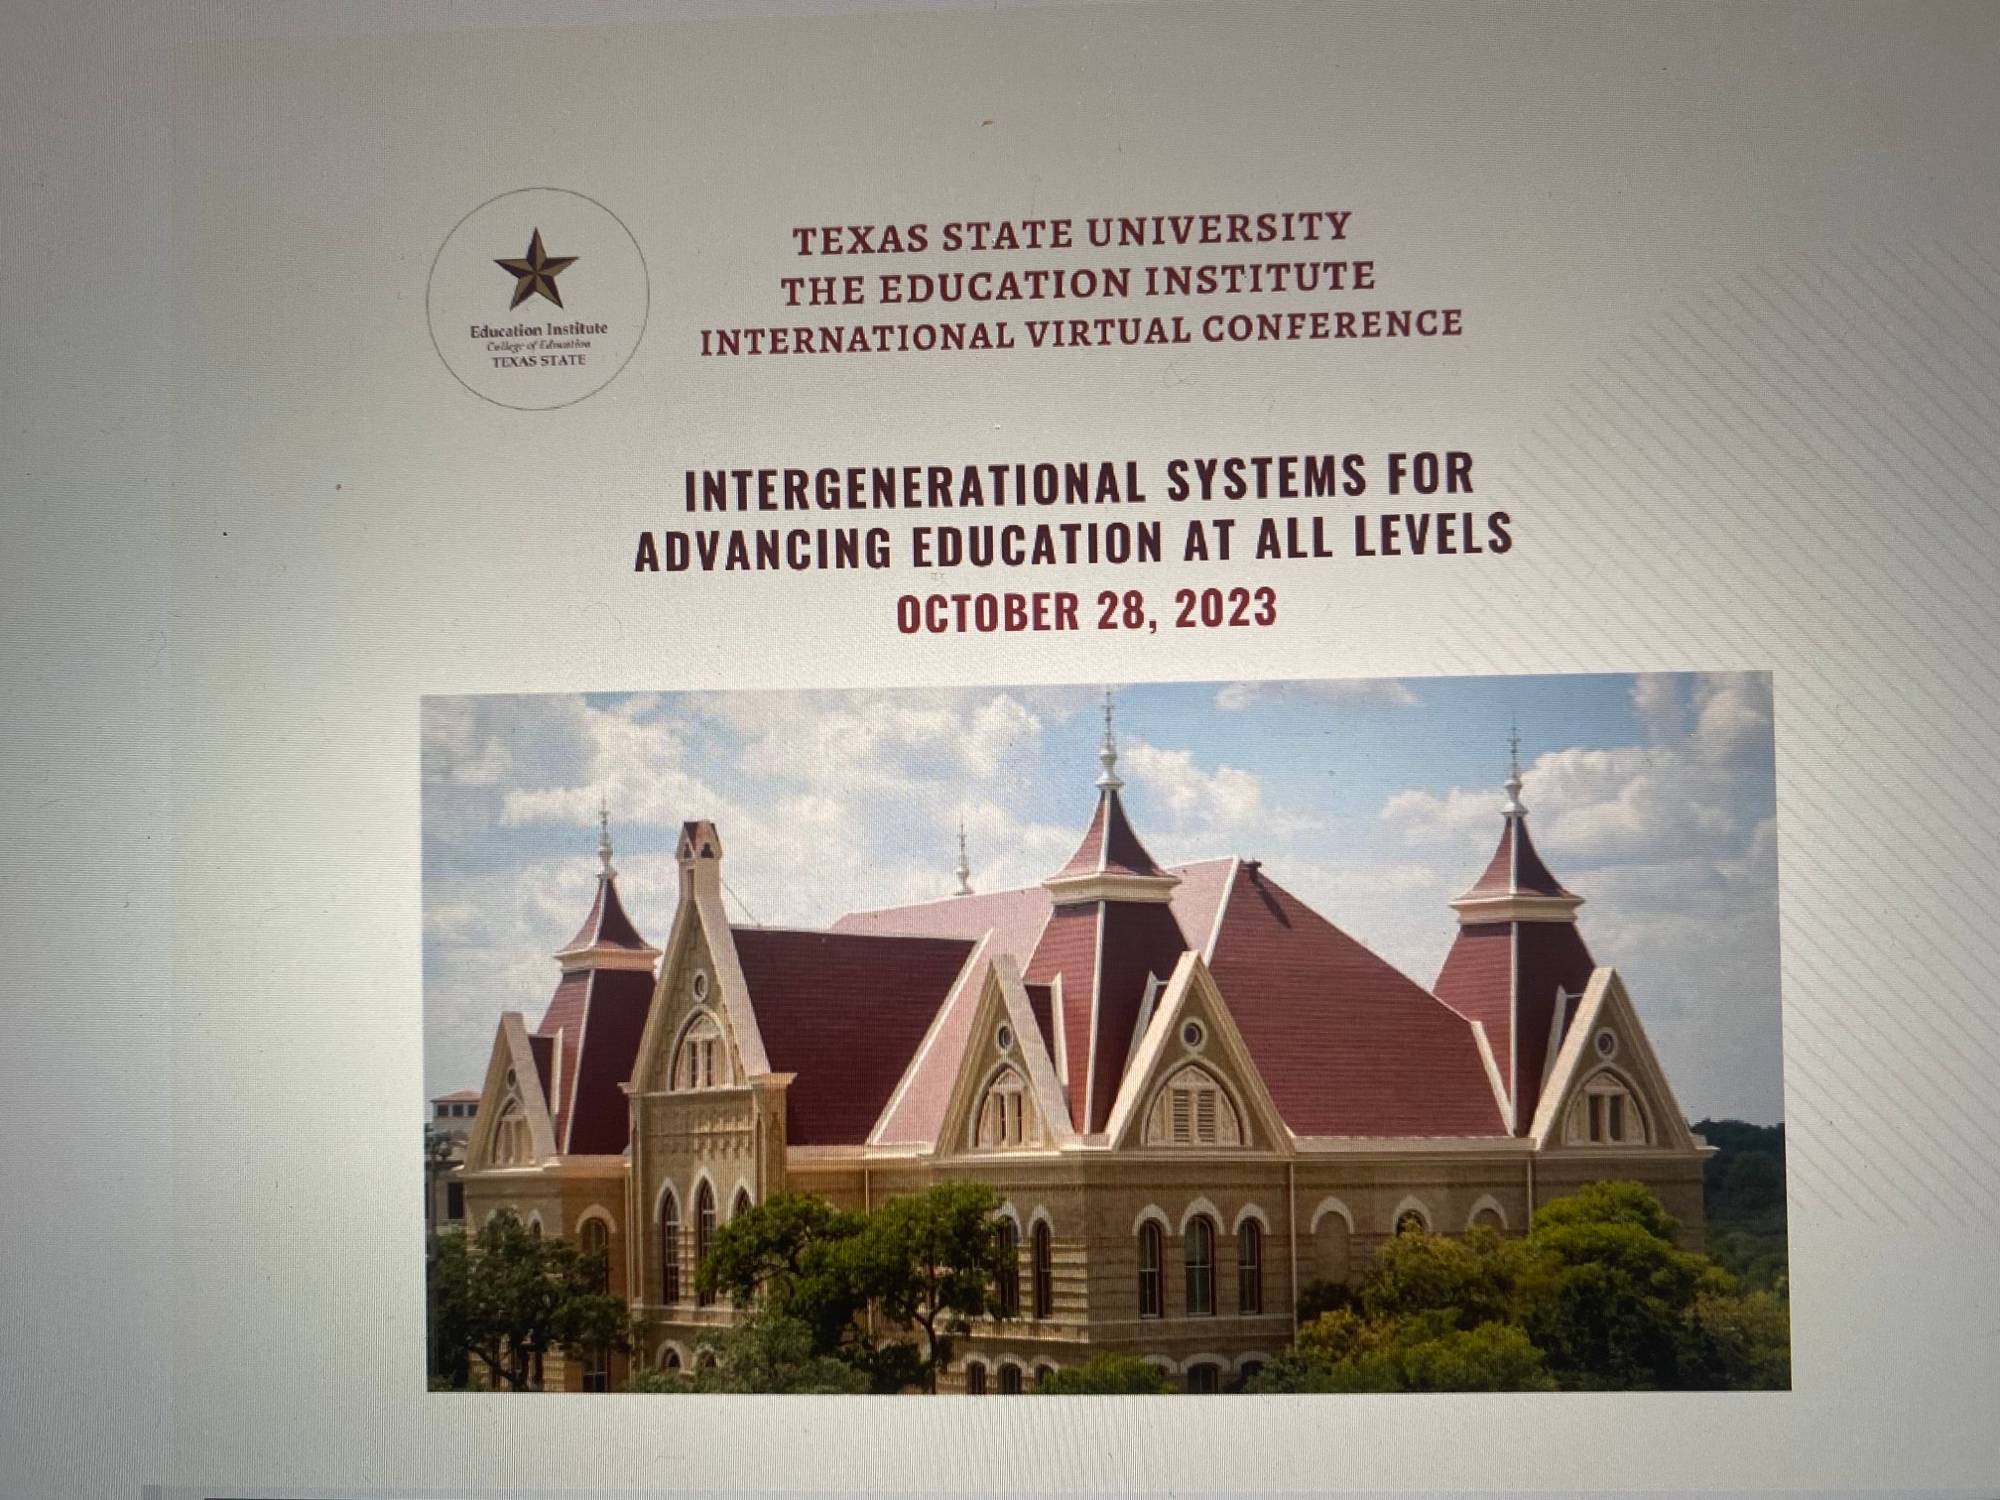 Congratulations to Dr. Larrotta and the Texas State University Education Institute for another successful global conference!